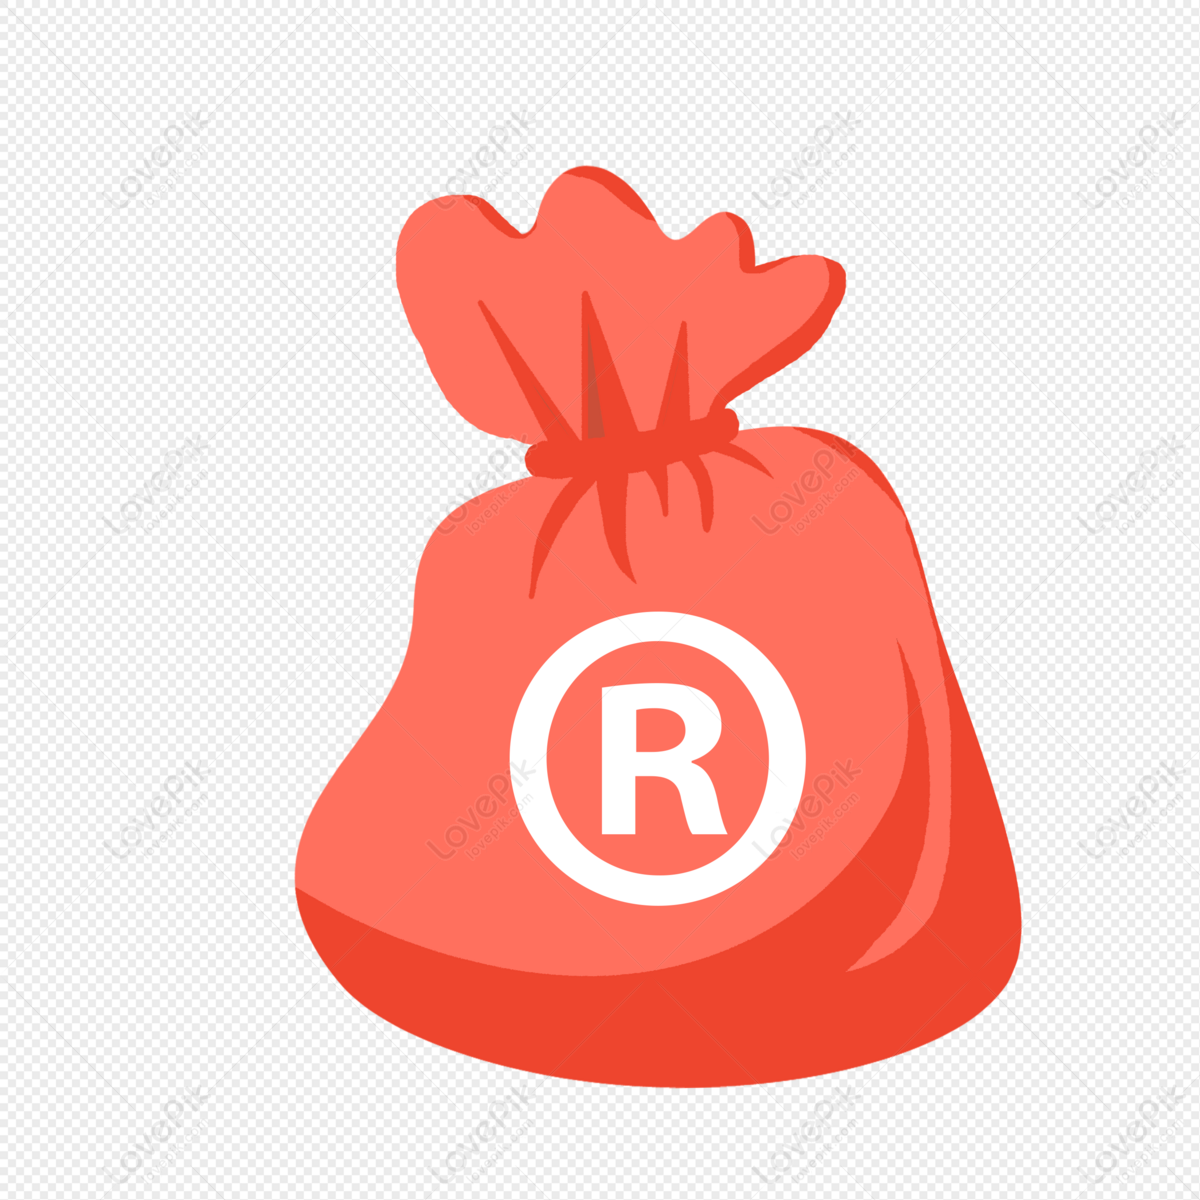 bag ,basket,black,outline,business,calculation,camera,carrying,cart,cash,cashbox,cashier,coins,collection,design,discount,drinks,equipment,filled,food,fridge,full,groceries,grocery, icon,illustration,list,lying,man,paper,payment,product,purchase,purse ...